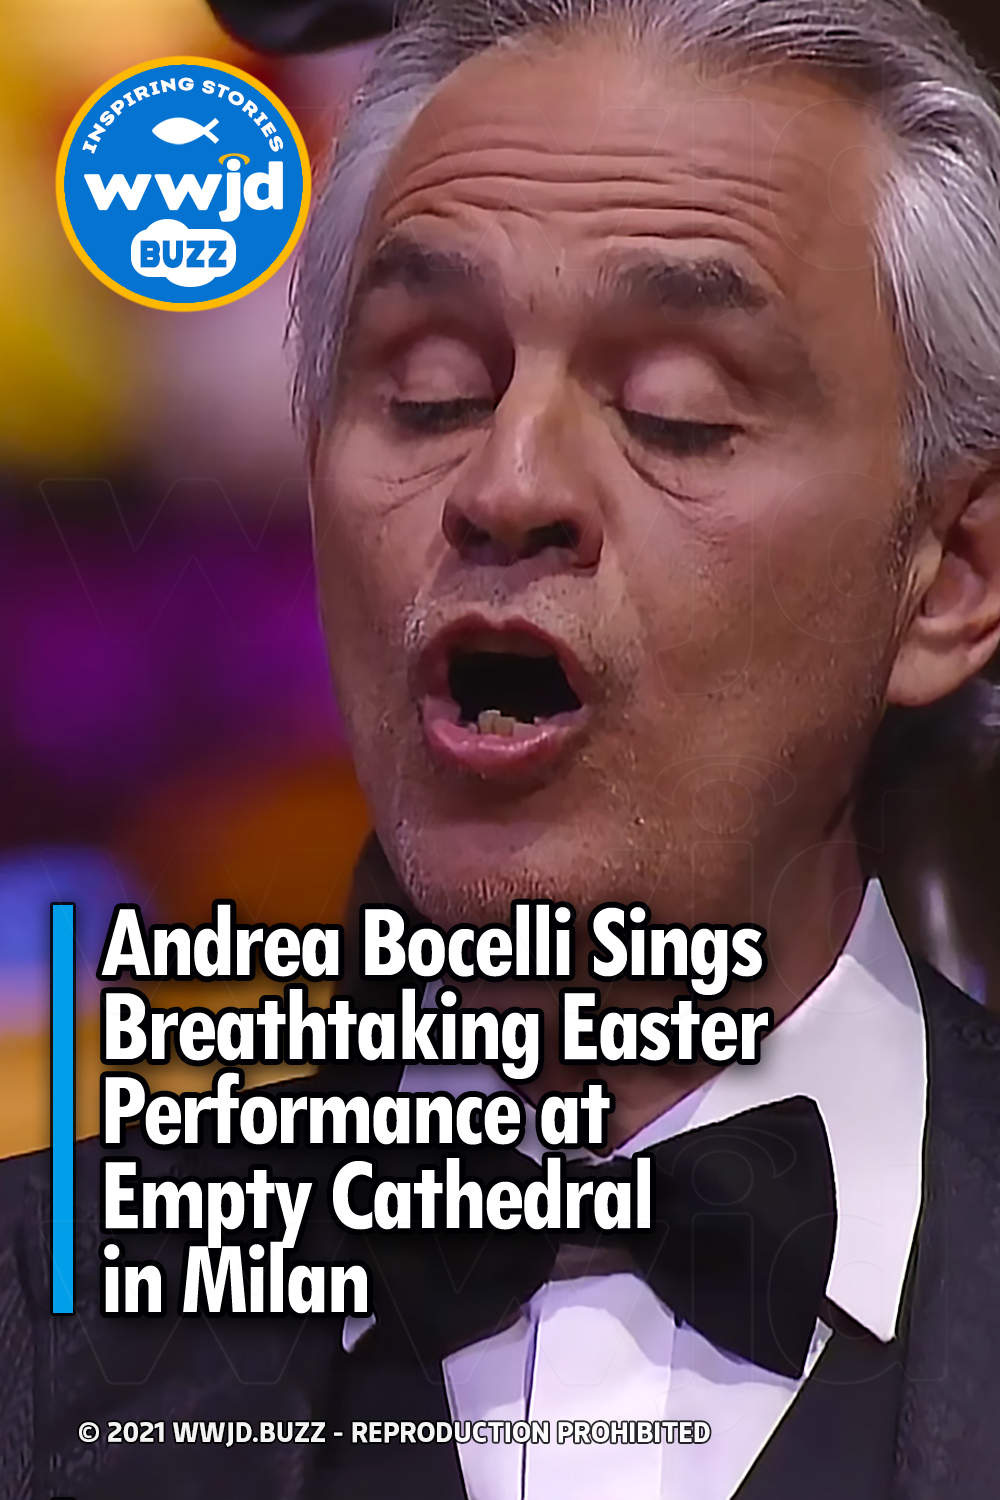 Andrea Bocelli Sings Breathtaking Easter Performance at Empty Cathedral in Milan